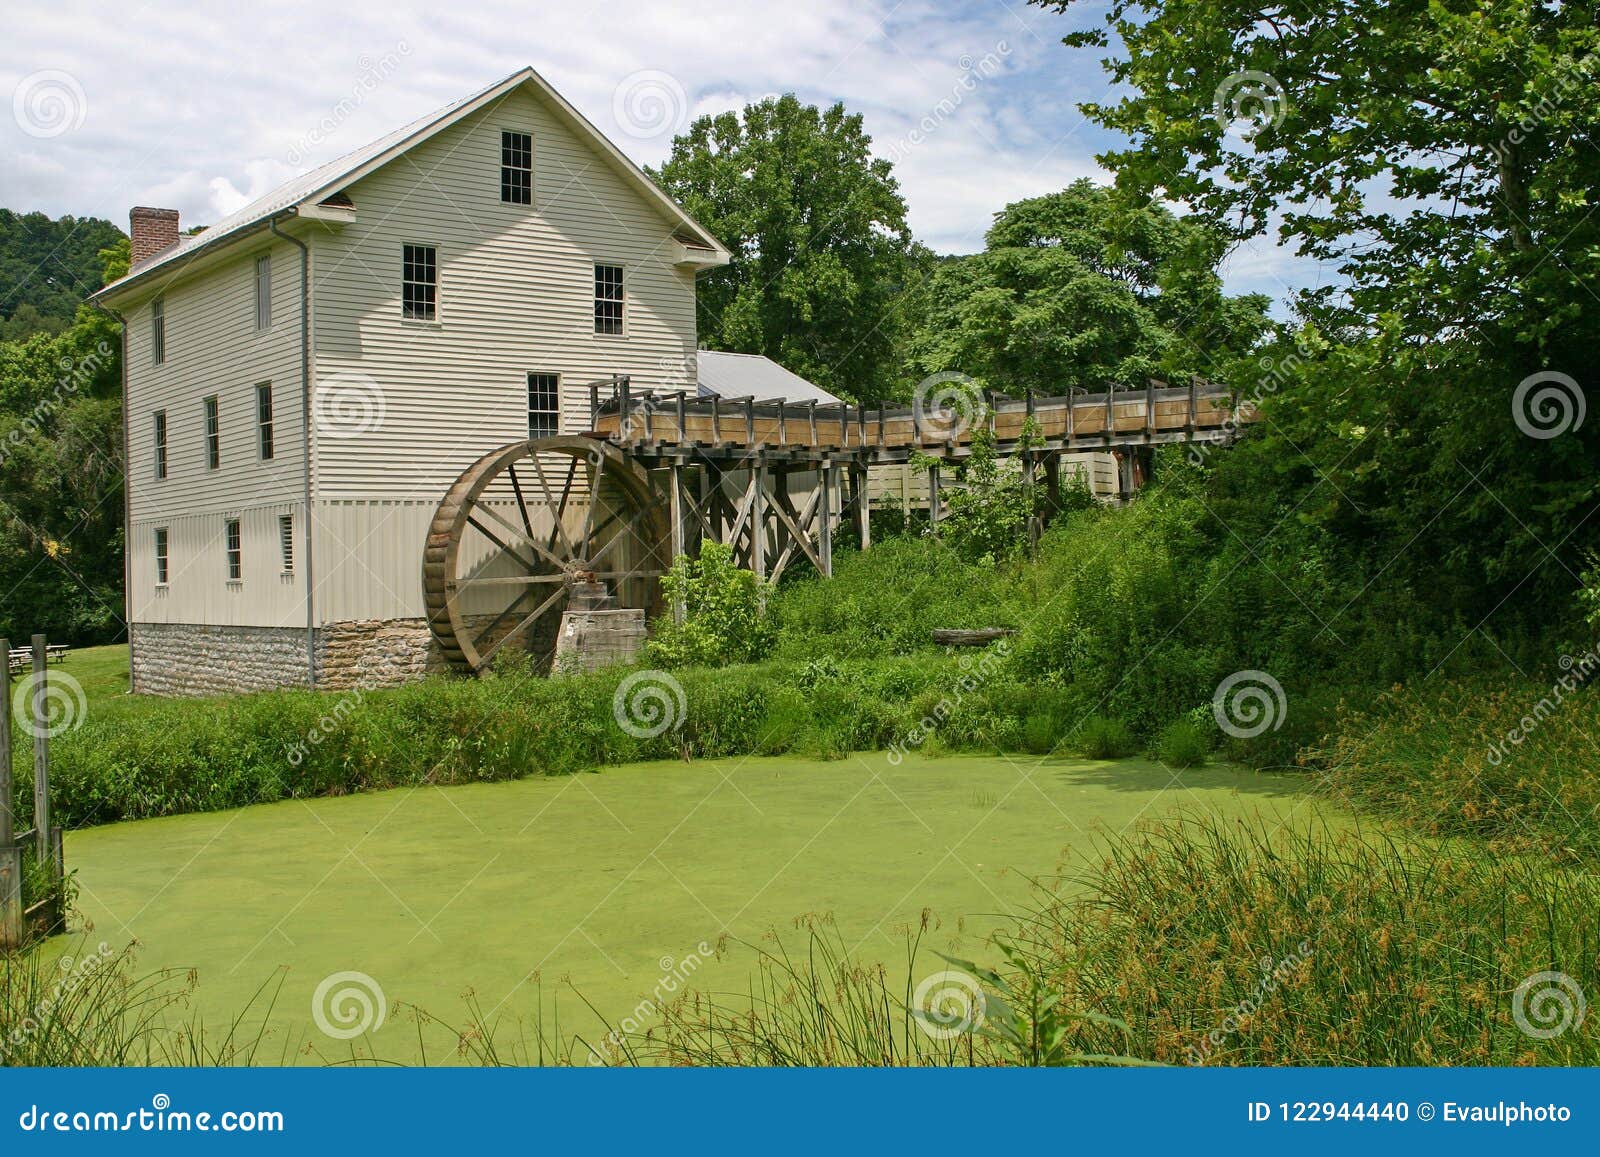 restored white gristmill and green pond